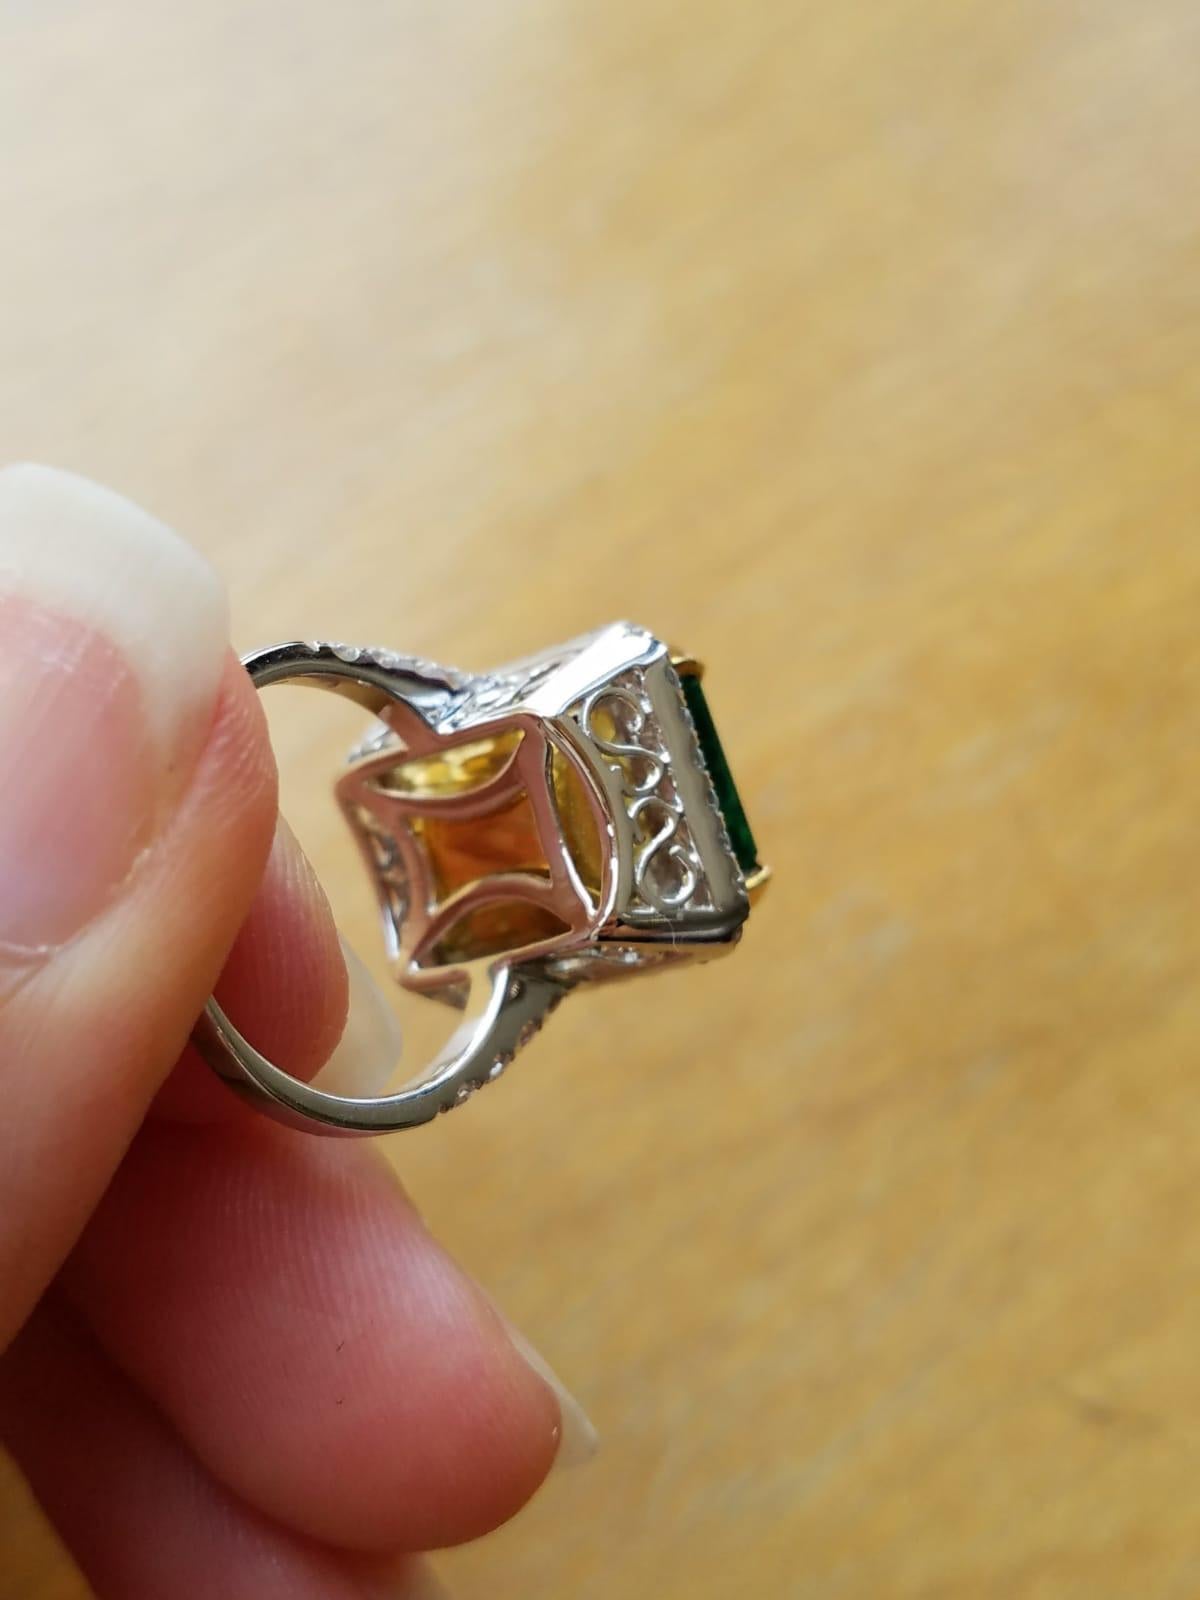 Beautiful and Lustrous, High Quality Zambian Emerald Cocktail Ring outlined with Diamond, all set in 18K White Gold and Yellow Gold prongs. 

Stone Details:  
Stone: Zambian Emerald
Cut: Emerald Cut
Carat Weight: 11.95 carat

Diamond Details:
Cut: